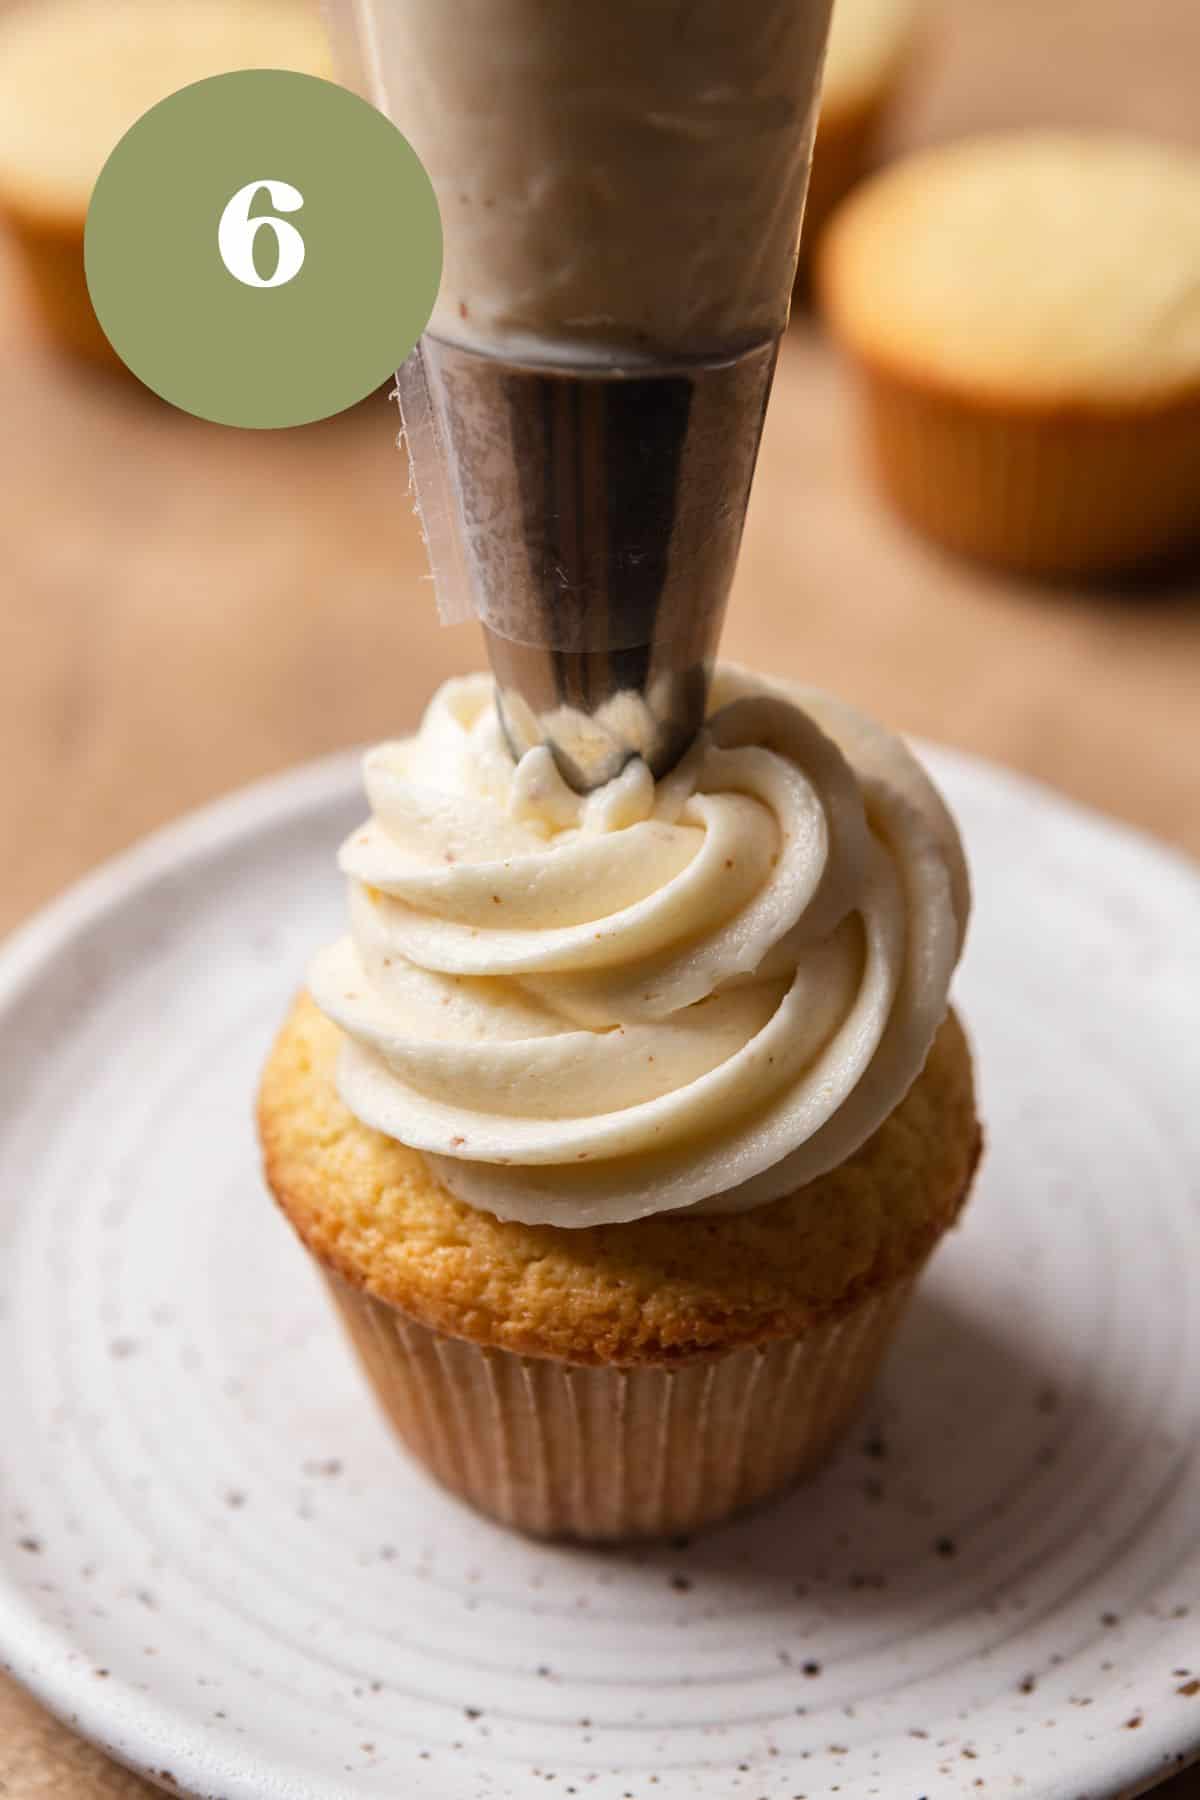 A cupcake on a white plate being piped with frosting.